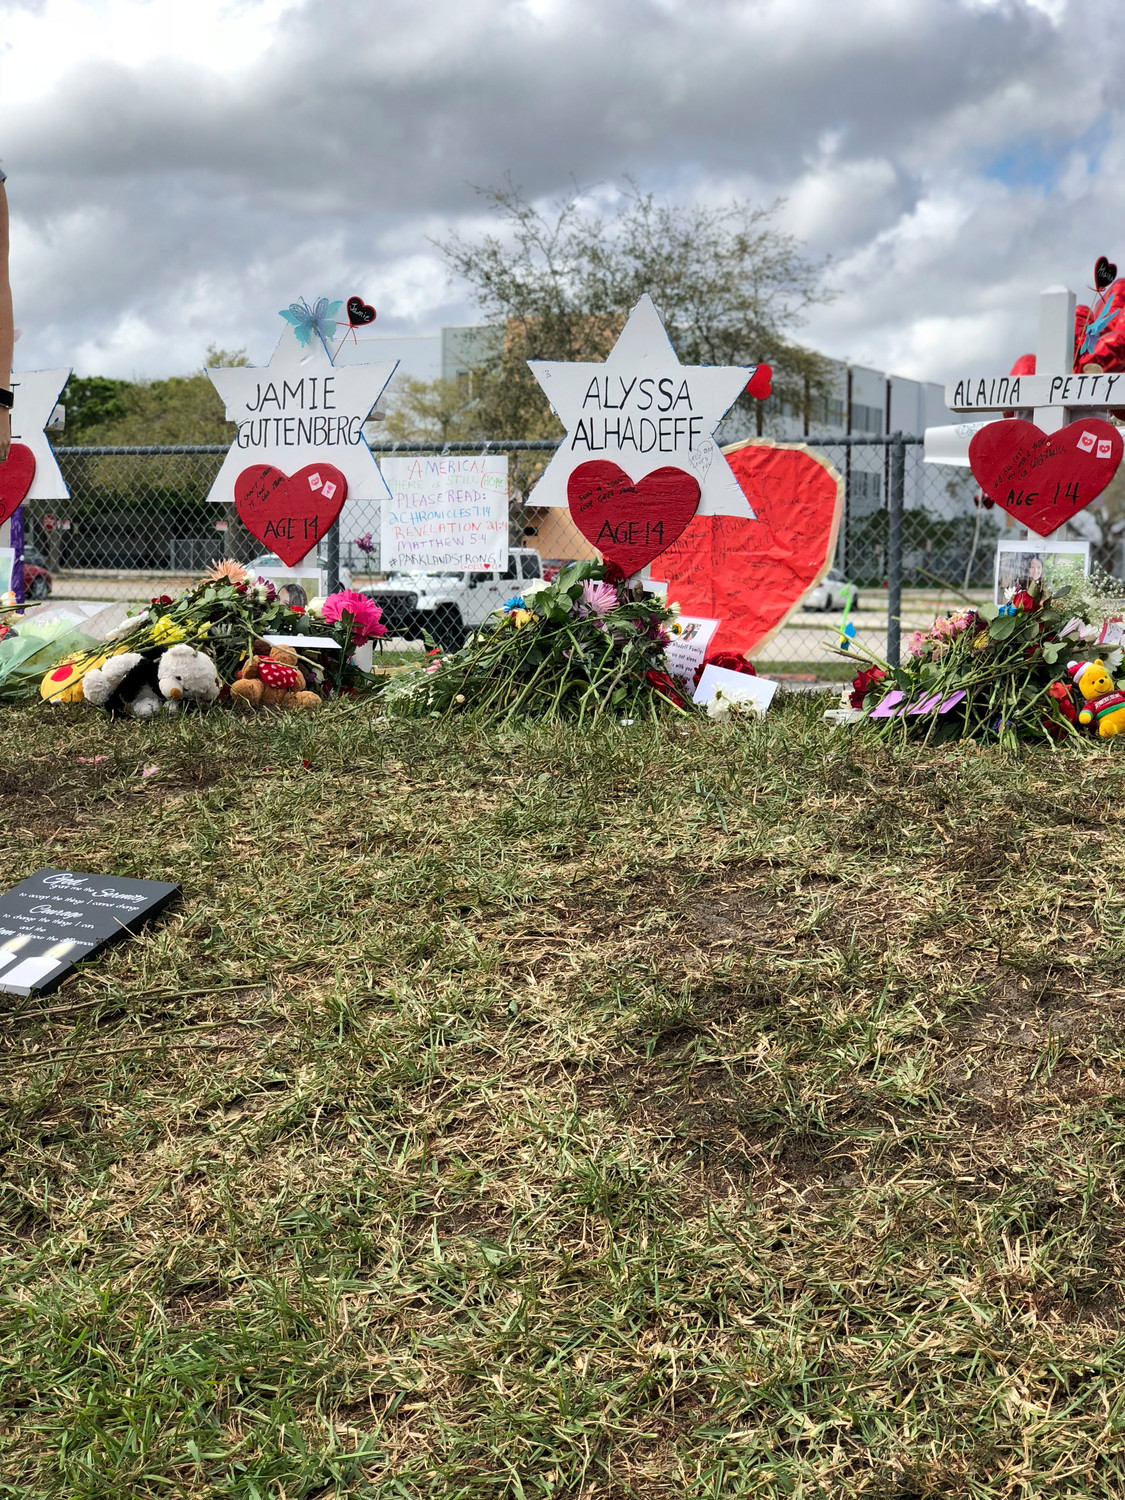 A vigil was held at Marjory Stoneman Douglas High School after the shooting on Feb. 14 in which 17 people died.